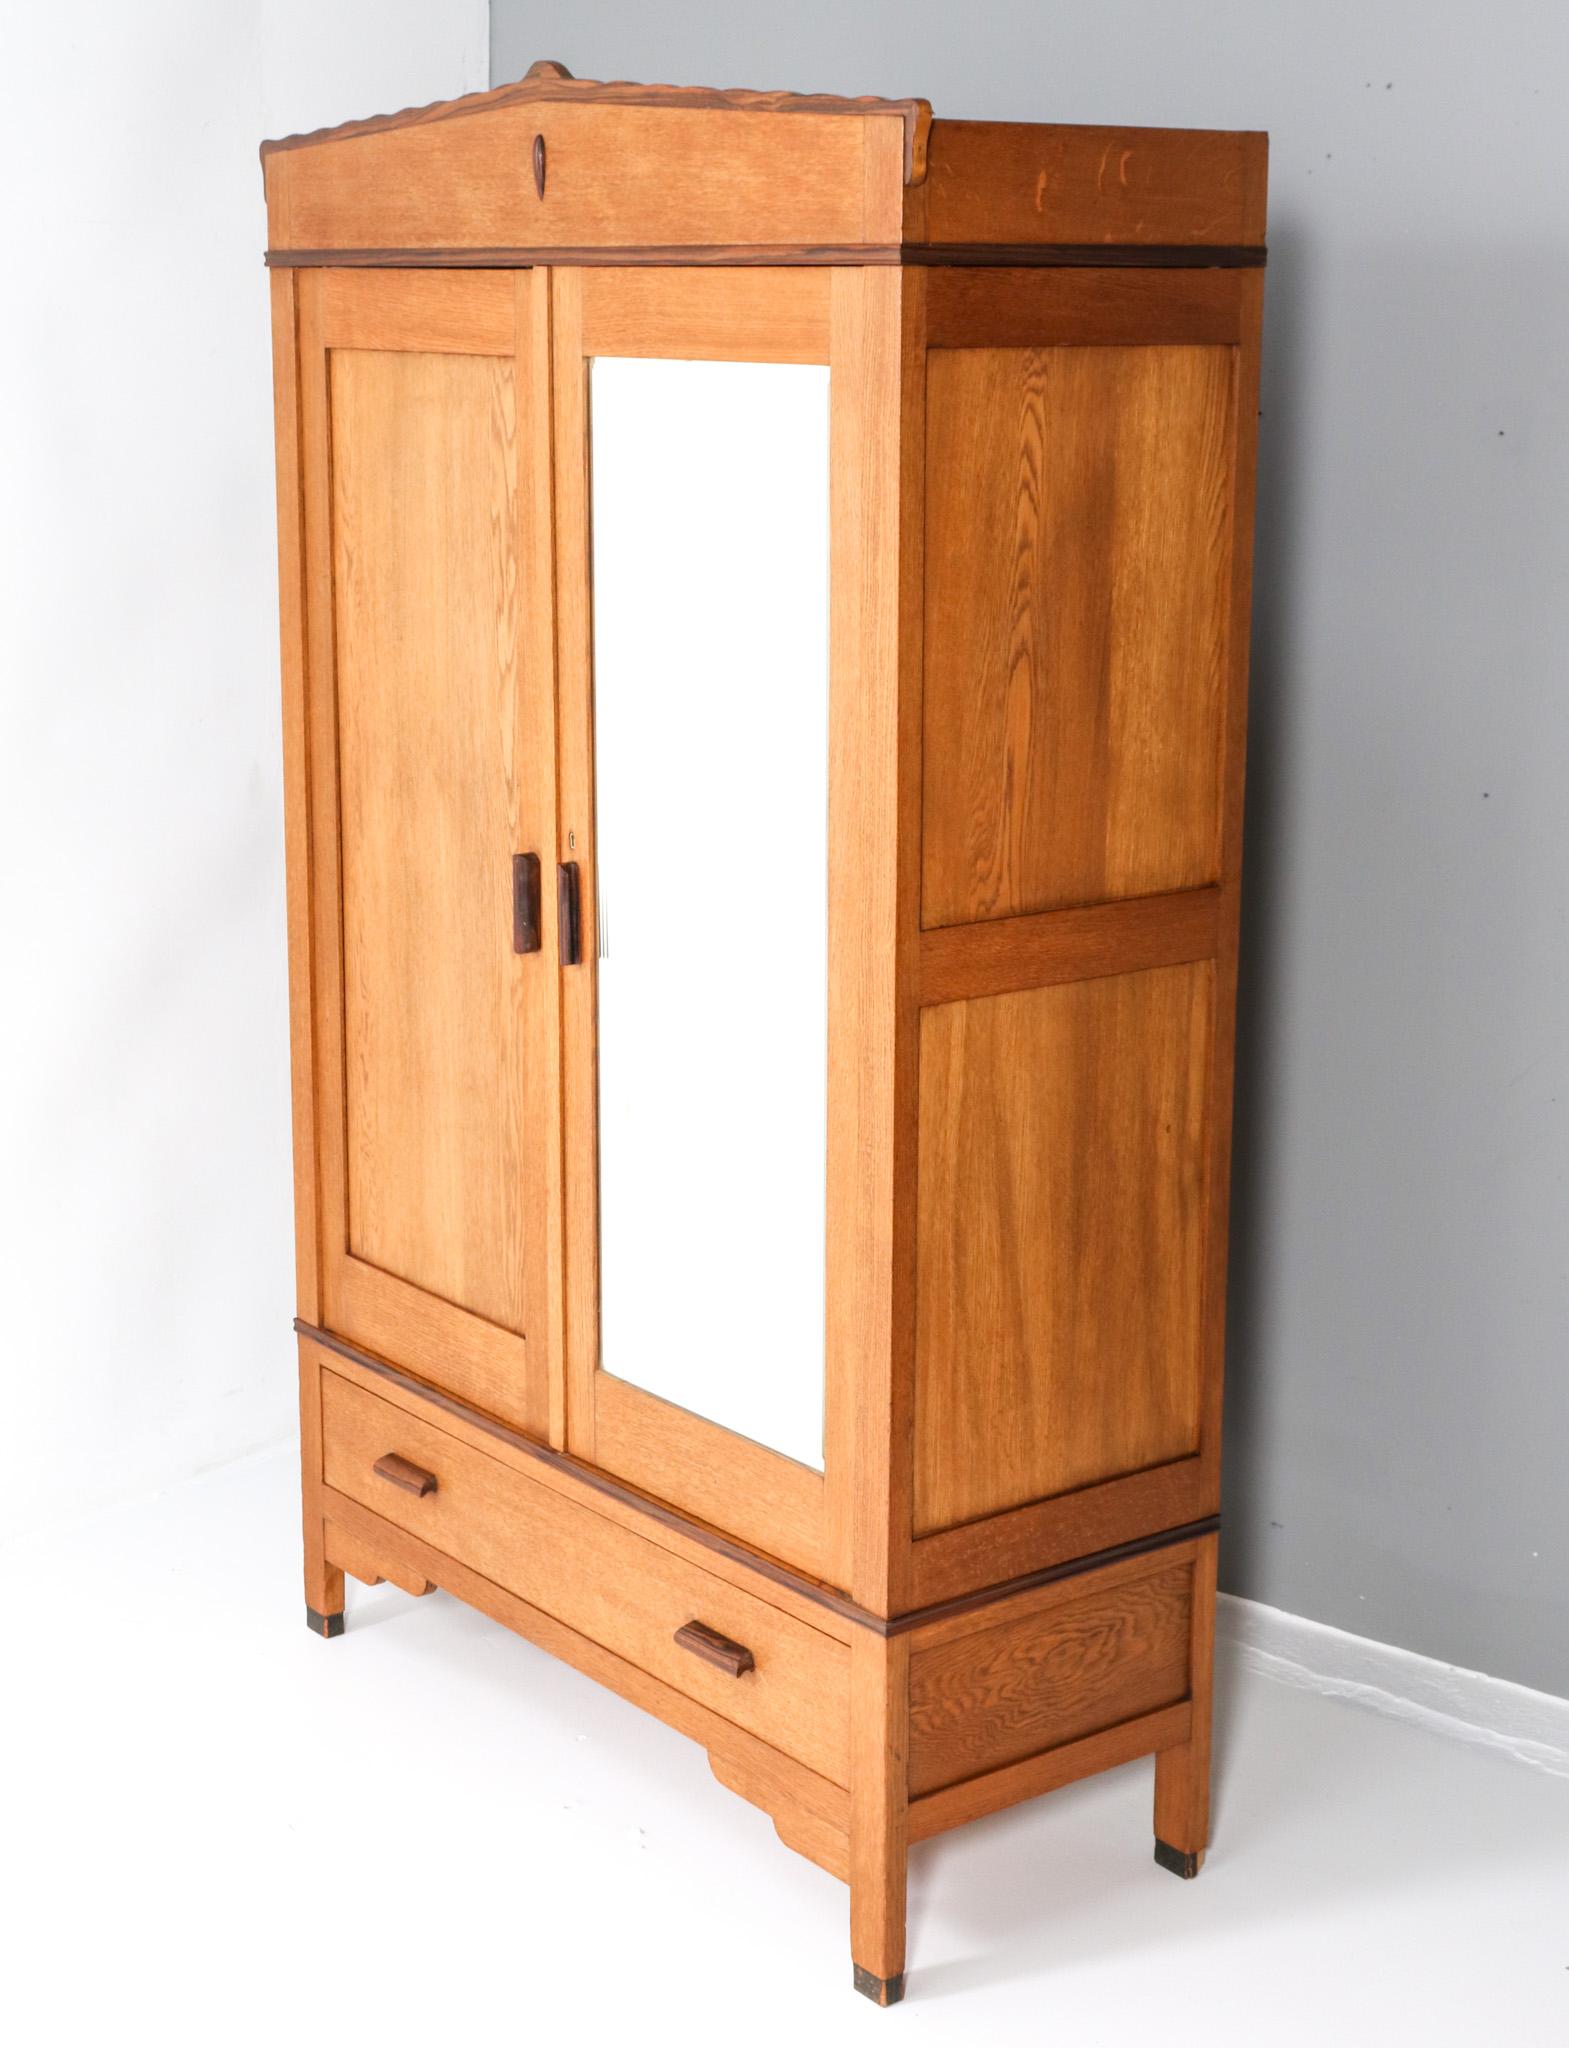 Early 20th Century Oak Art Deco Amsterdamse School Armoire by Fa. Drilling Amsterdam, 1920s For Sale